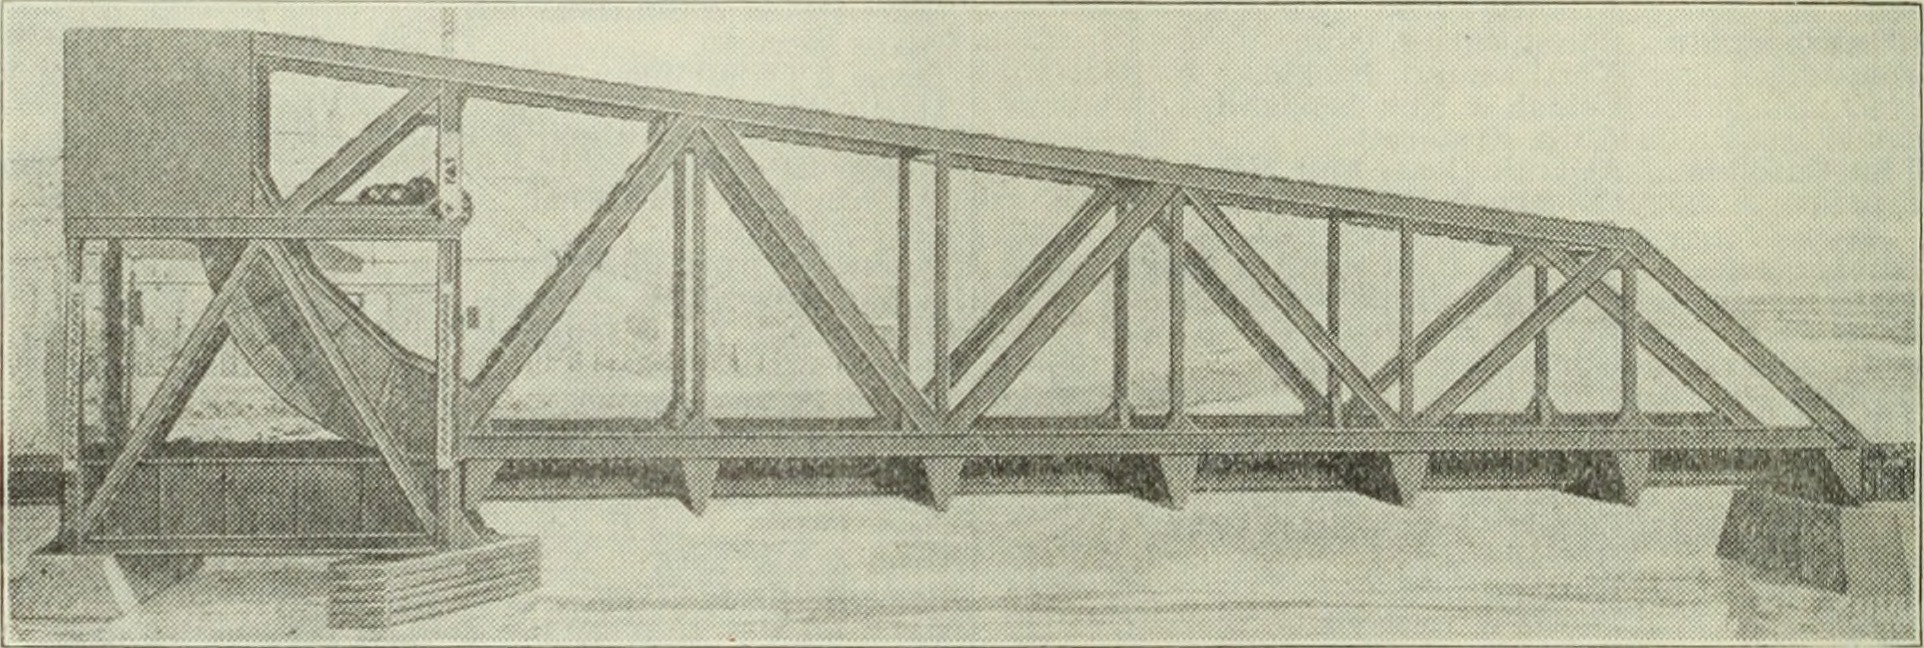 Image from page 255 of "The Commercial and financial chronicle" (1909)